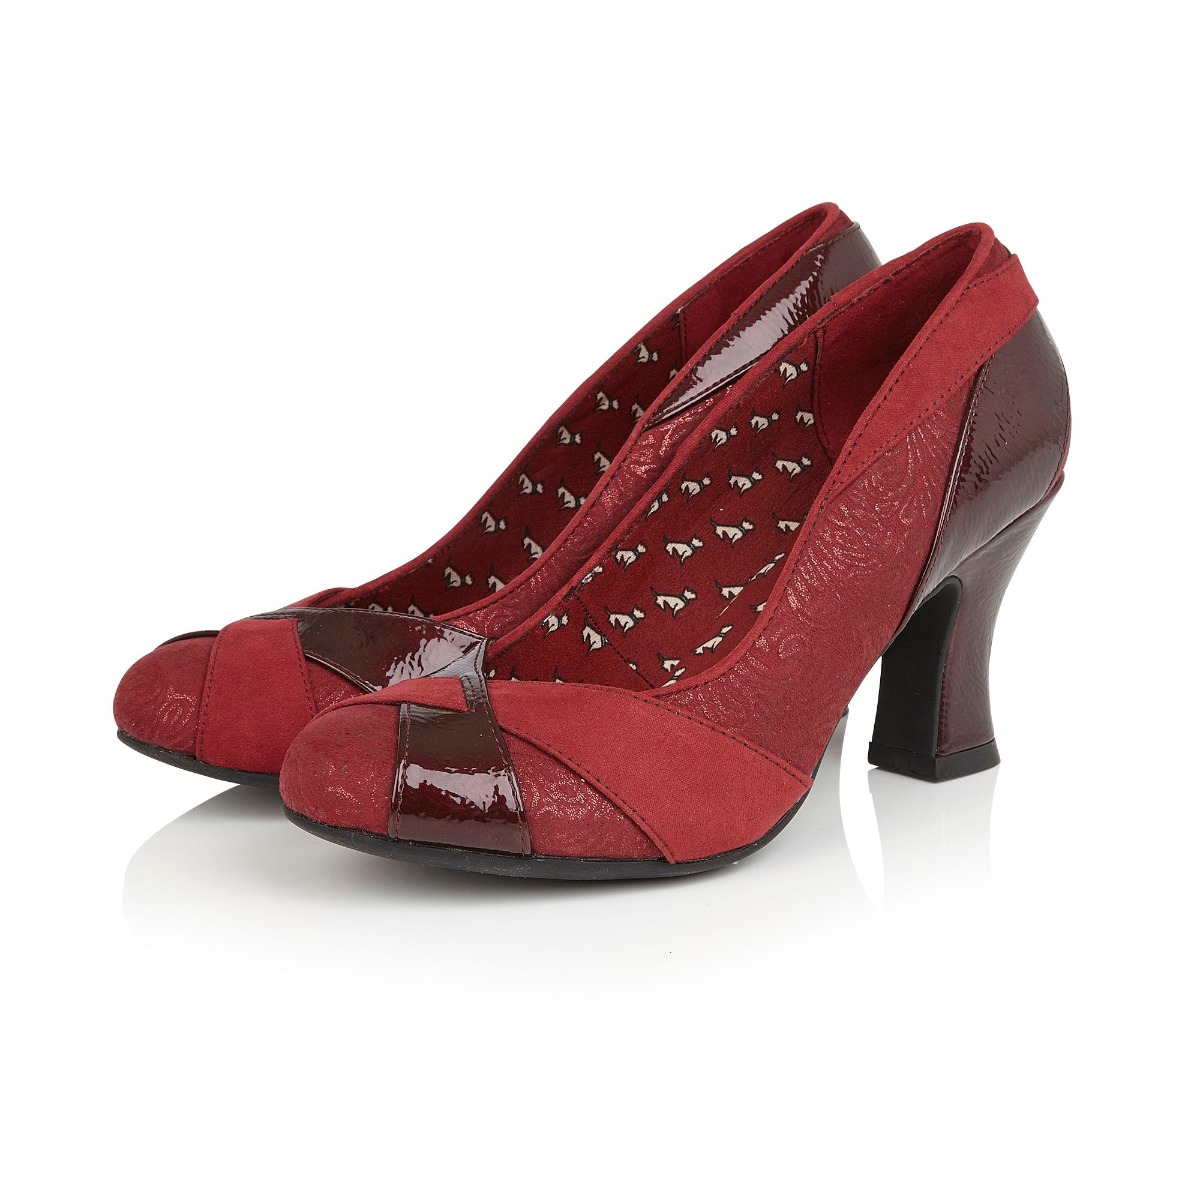 rs09306bb_chaussures-escarpins-pin-up-retro-50-s-glam-chic-lulu-bordeaux